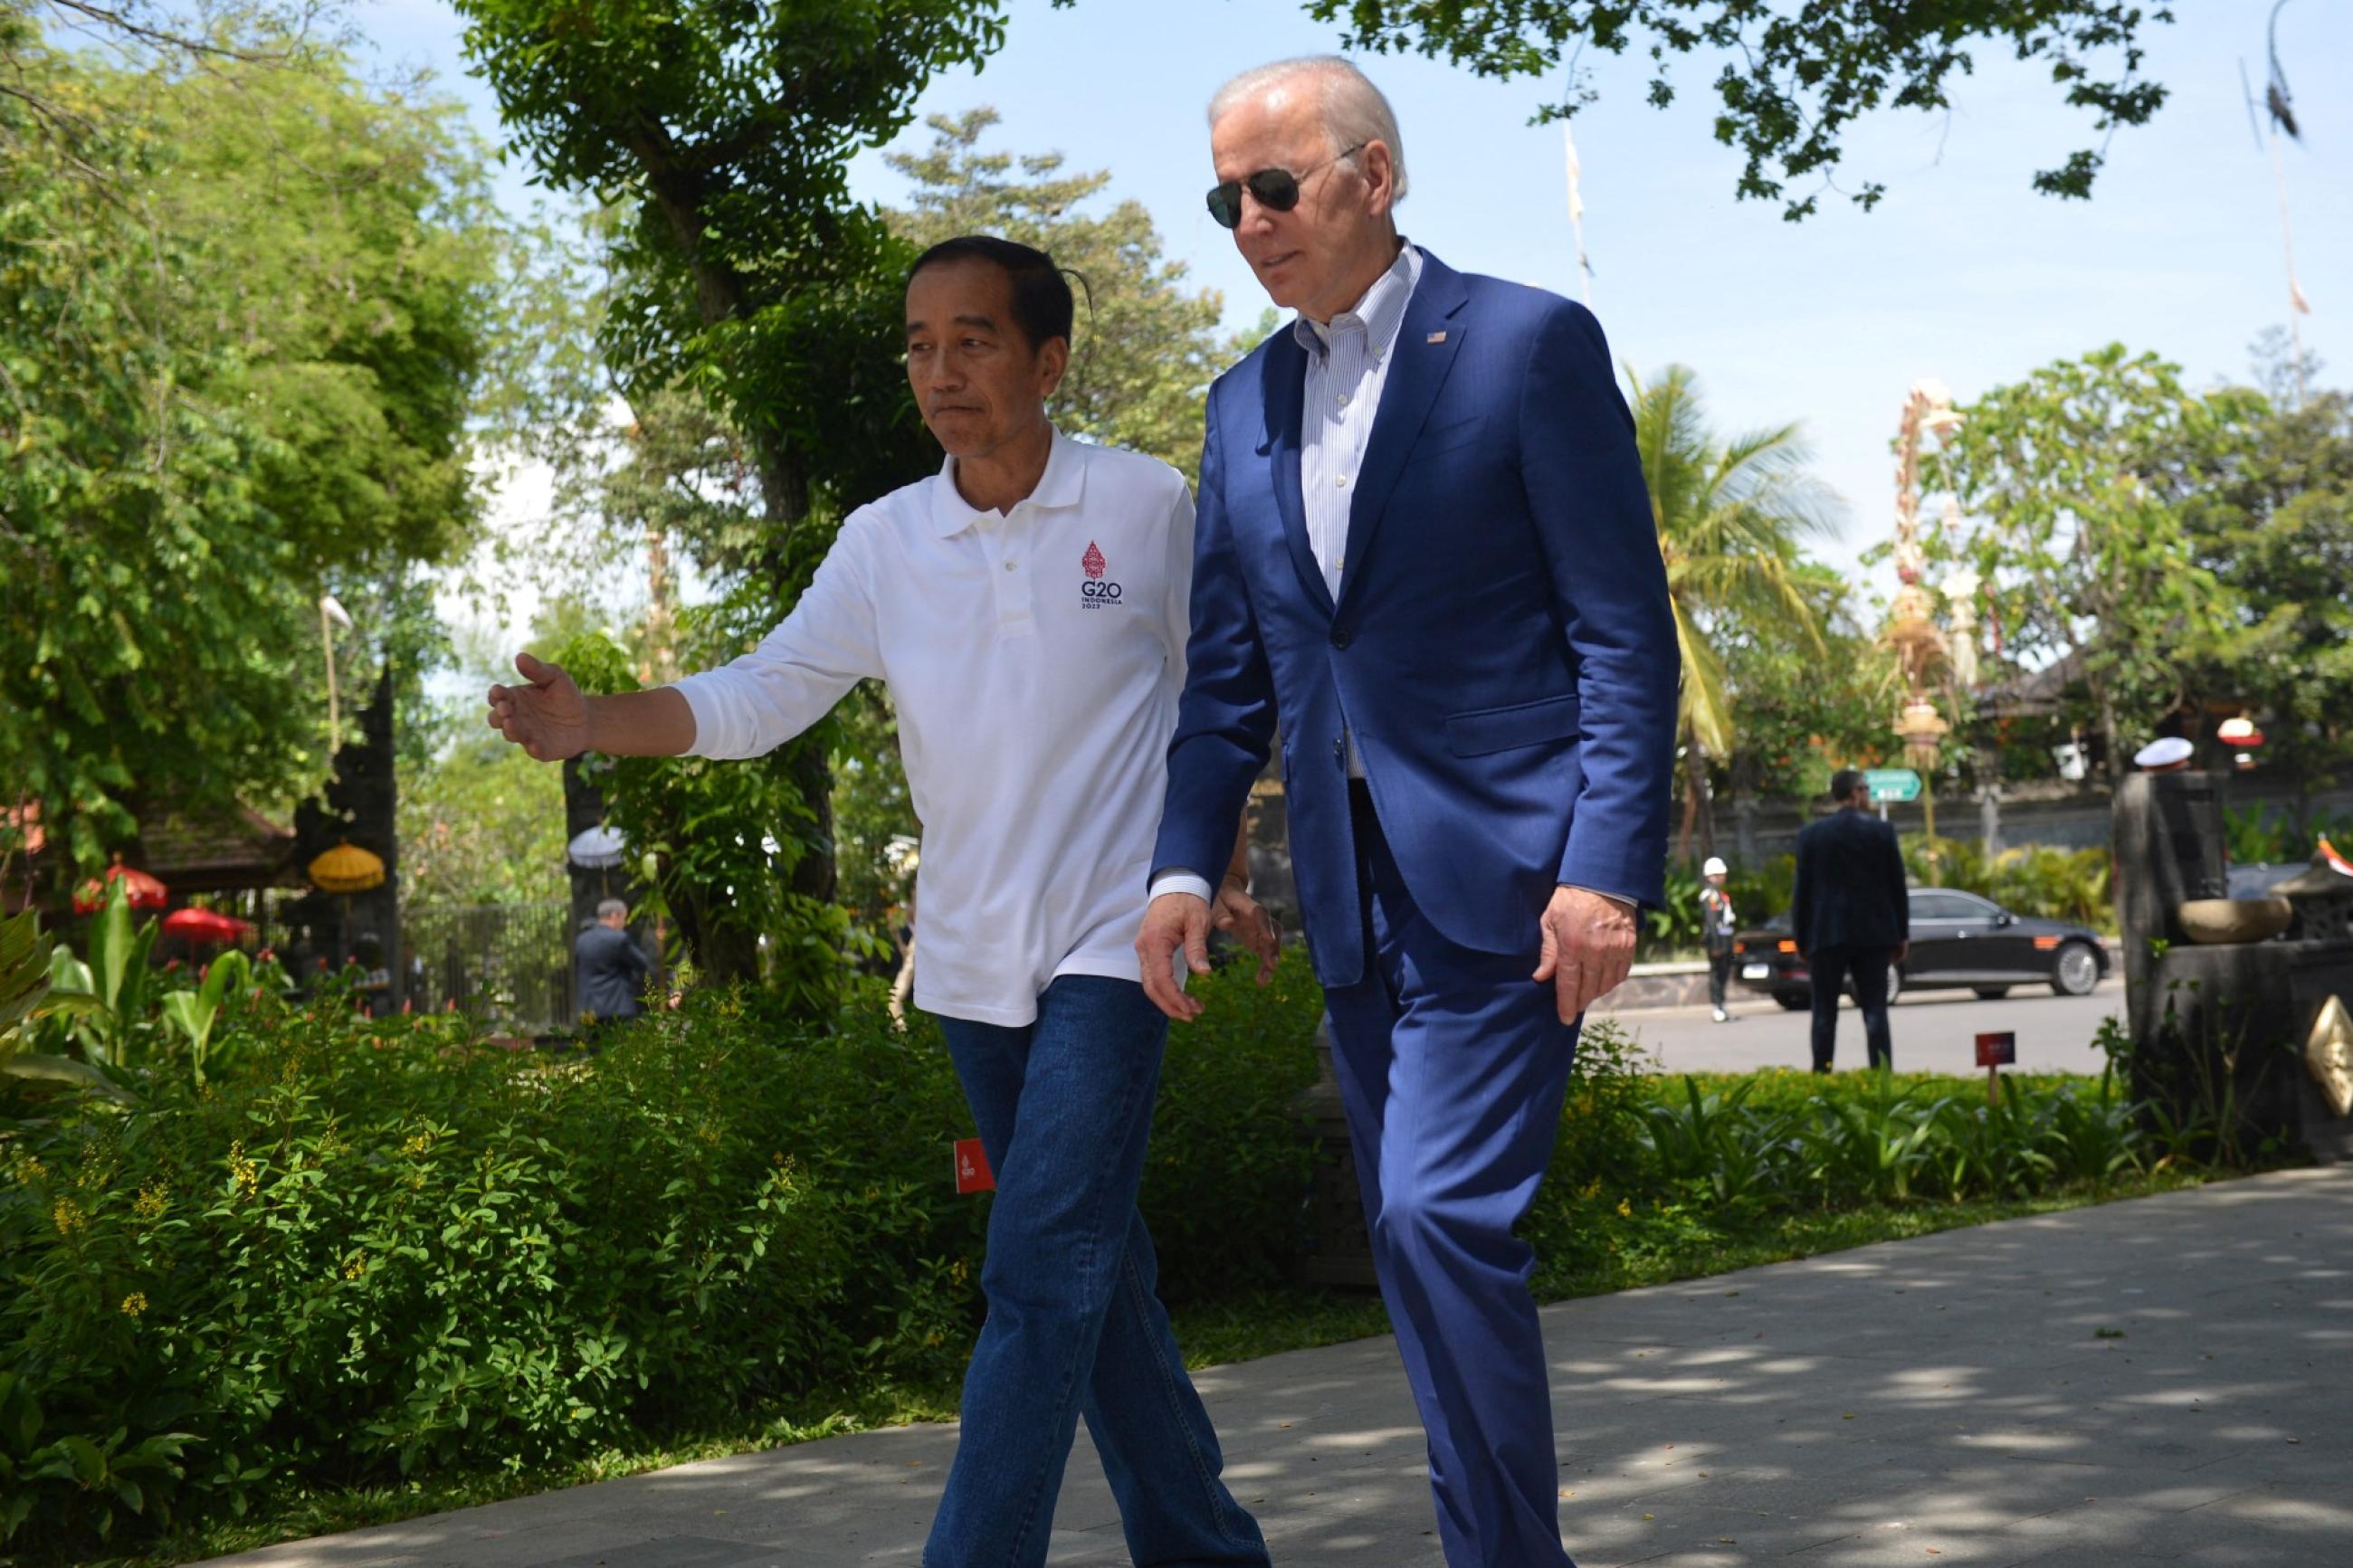 Indonesian President Joko Widodo welcomes U.S. President Joe Biden on the second day of the G20 Indonesia Summit events at the Ngurah Rai Forest Park, Denpasar, Bali, Indonesia, on November 16, 2022.